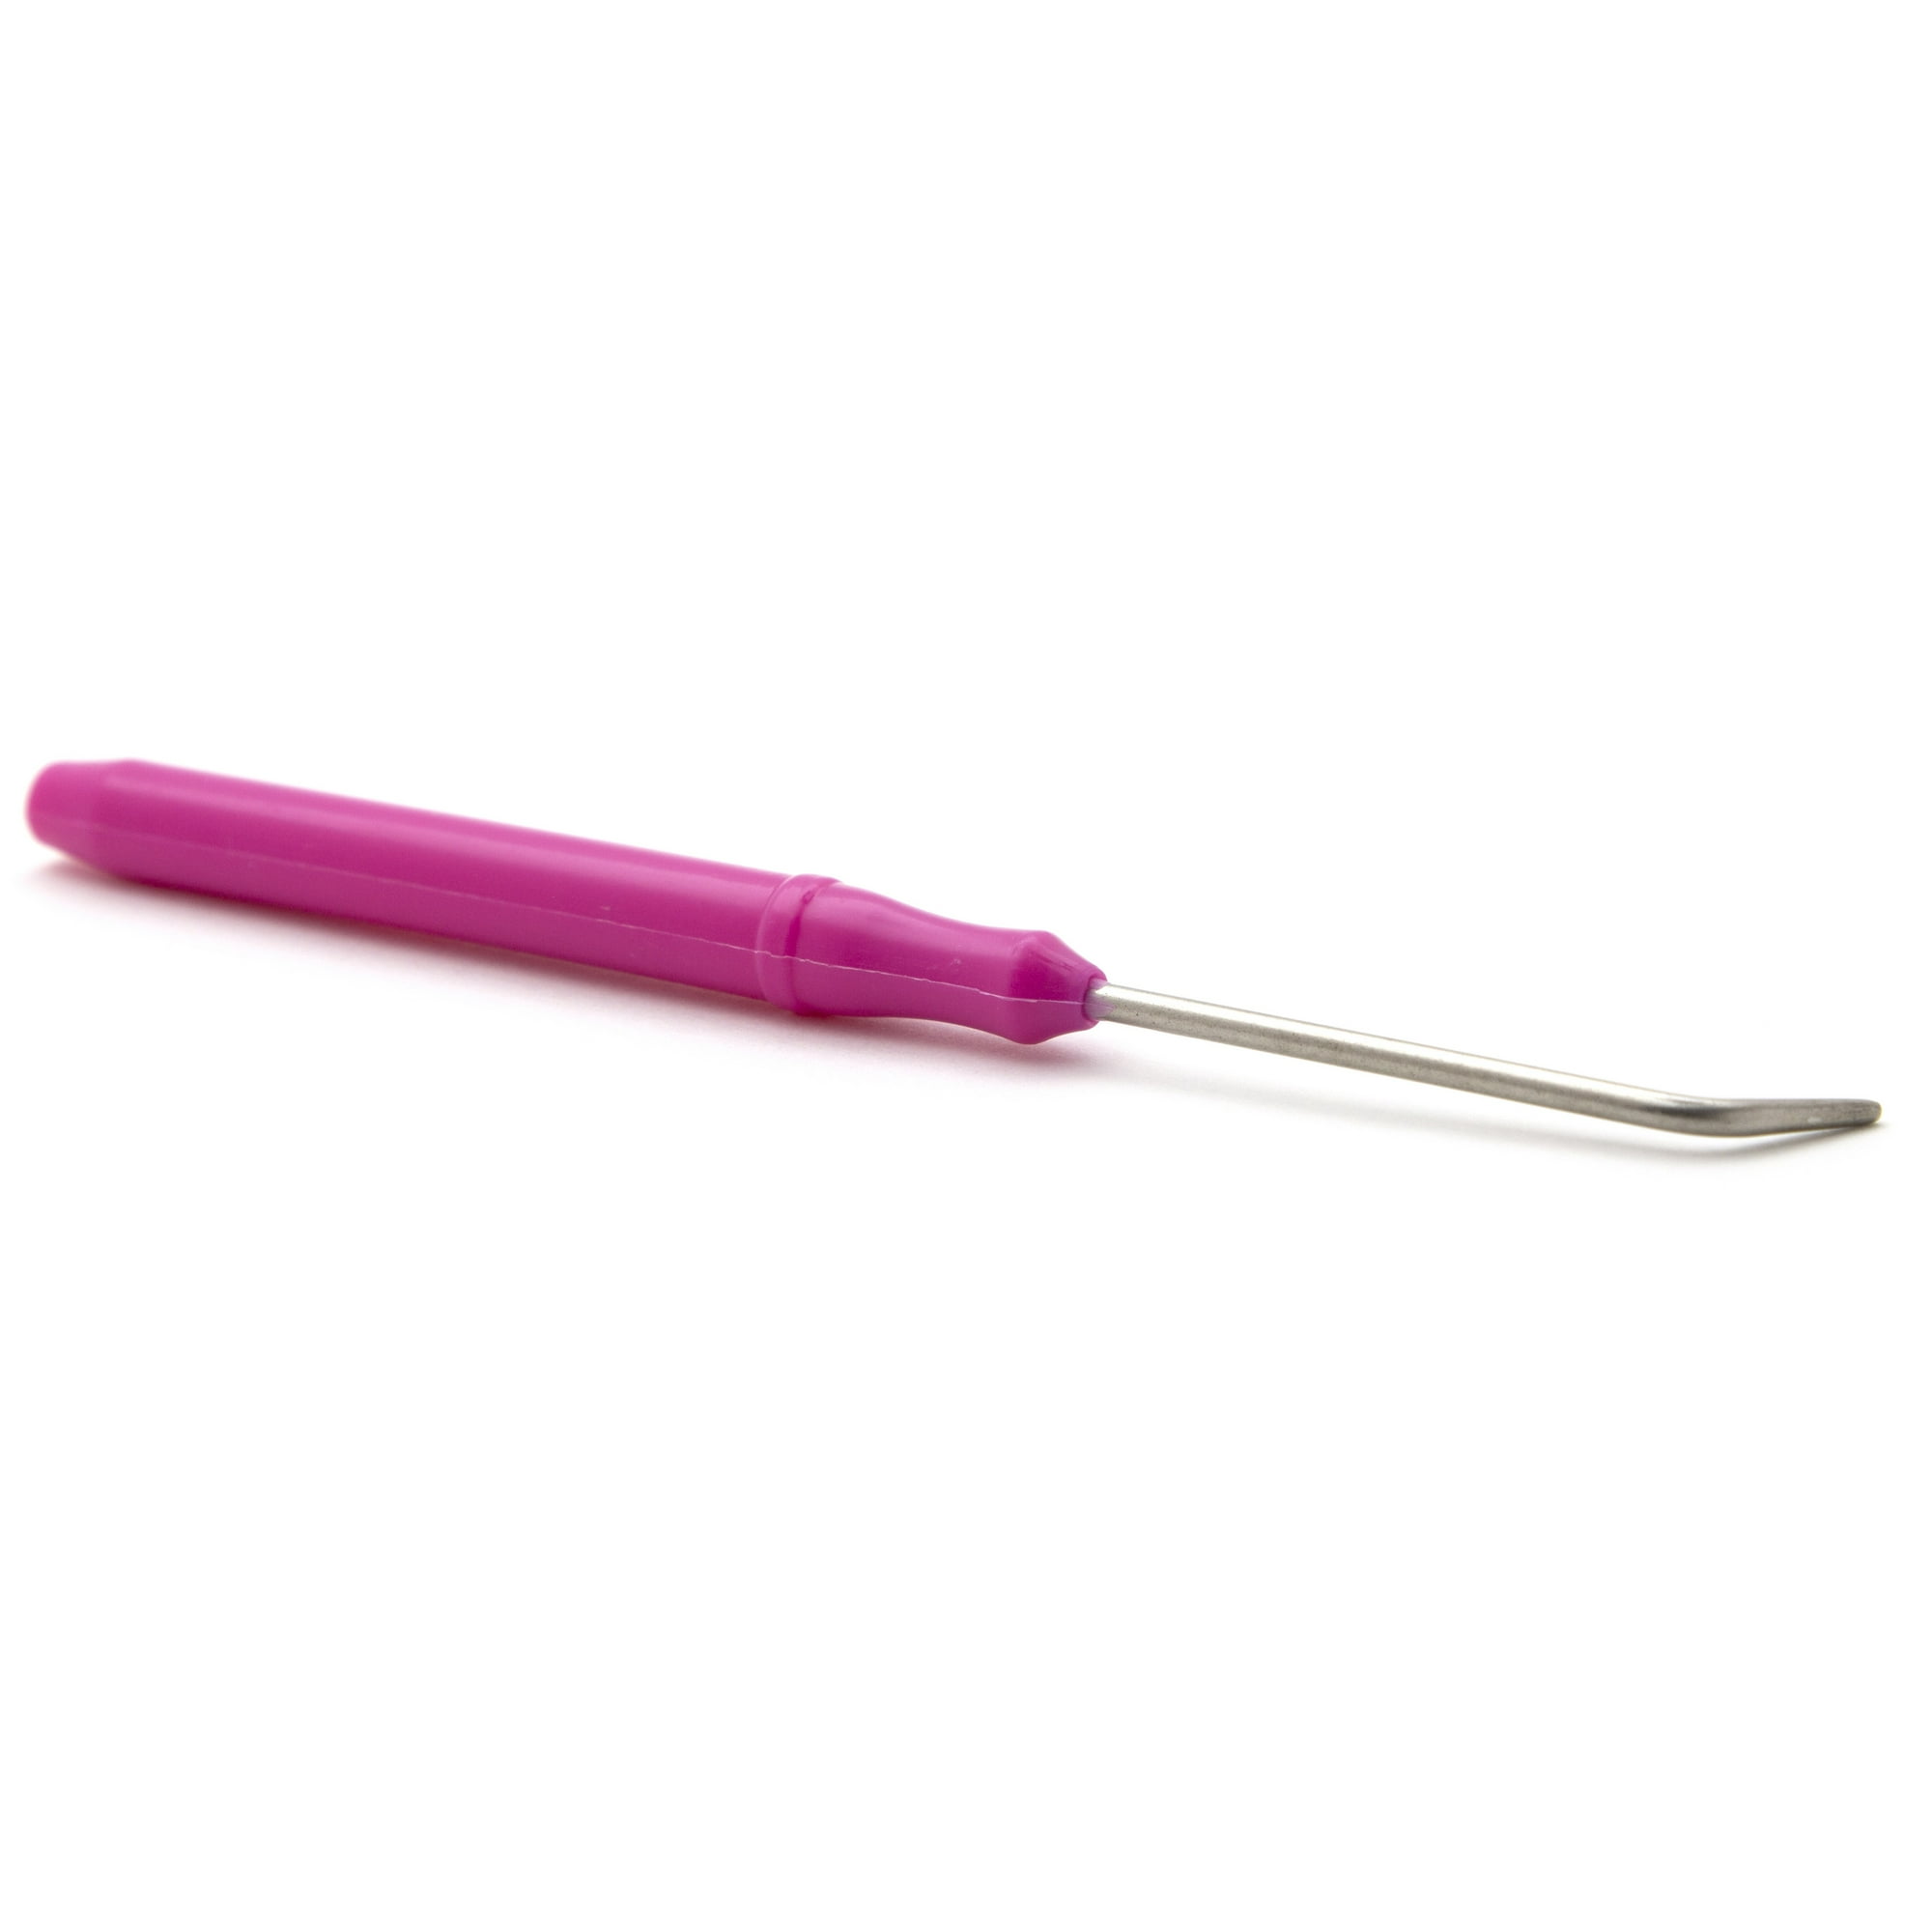 Cousin Knitting Loom Hook Tool-Silver/Pink